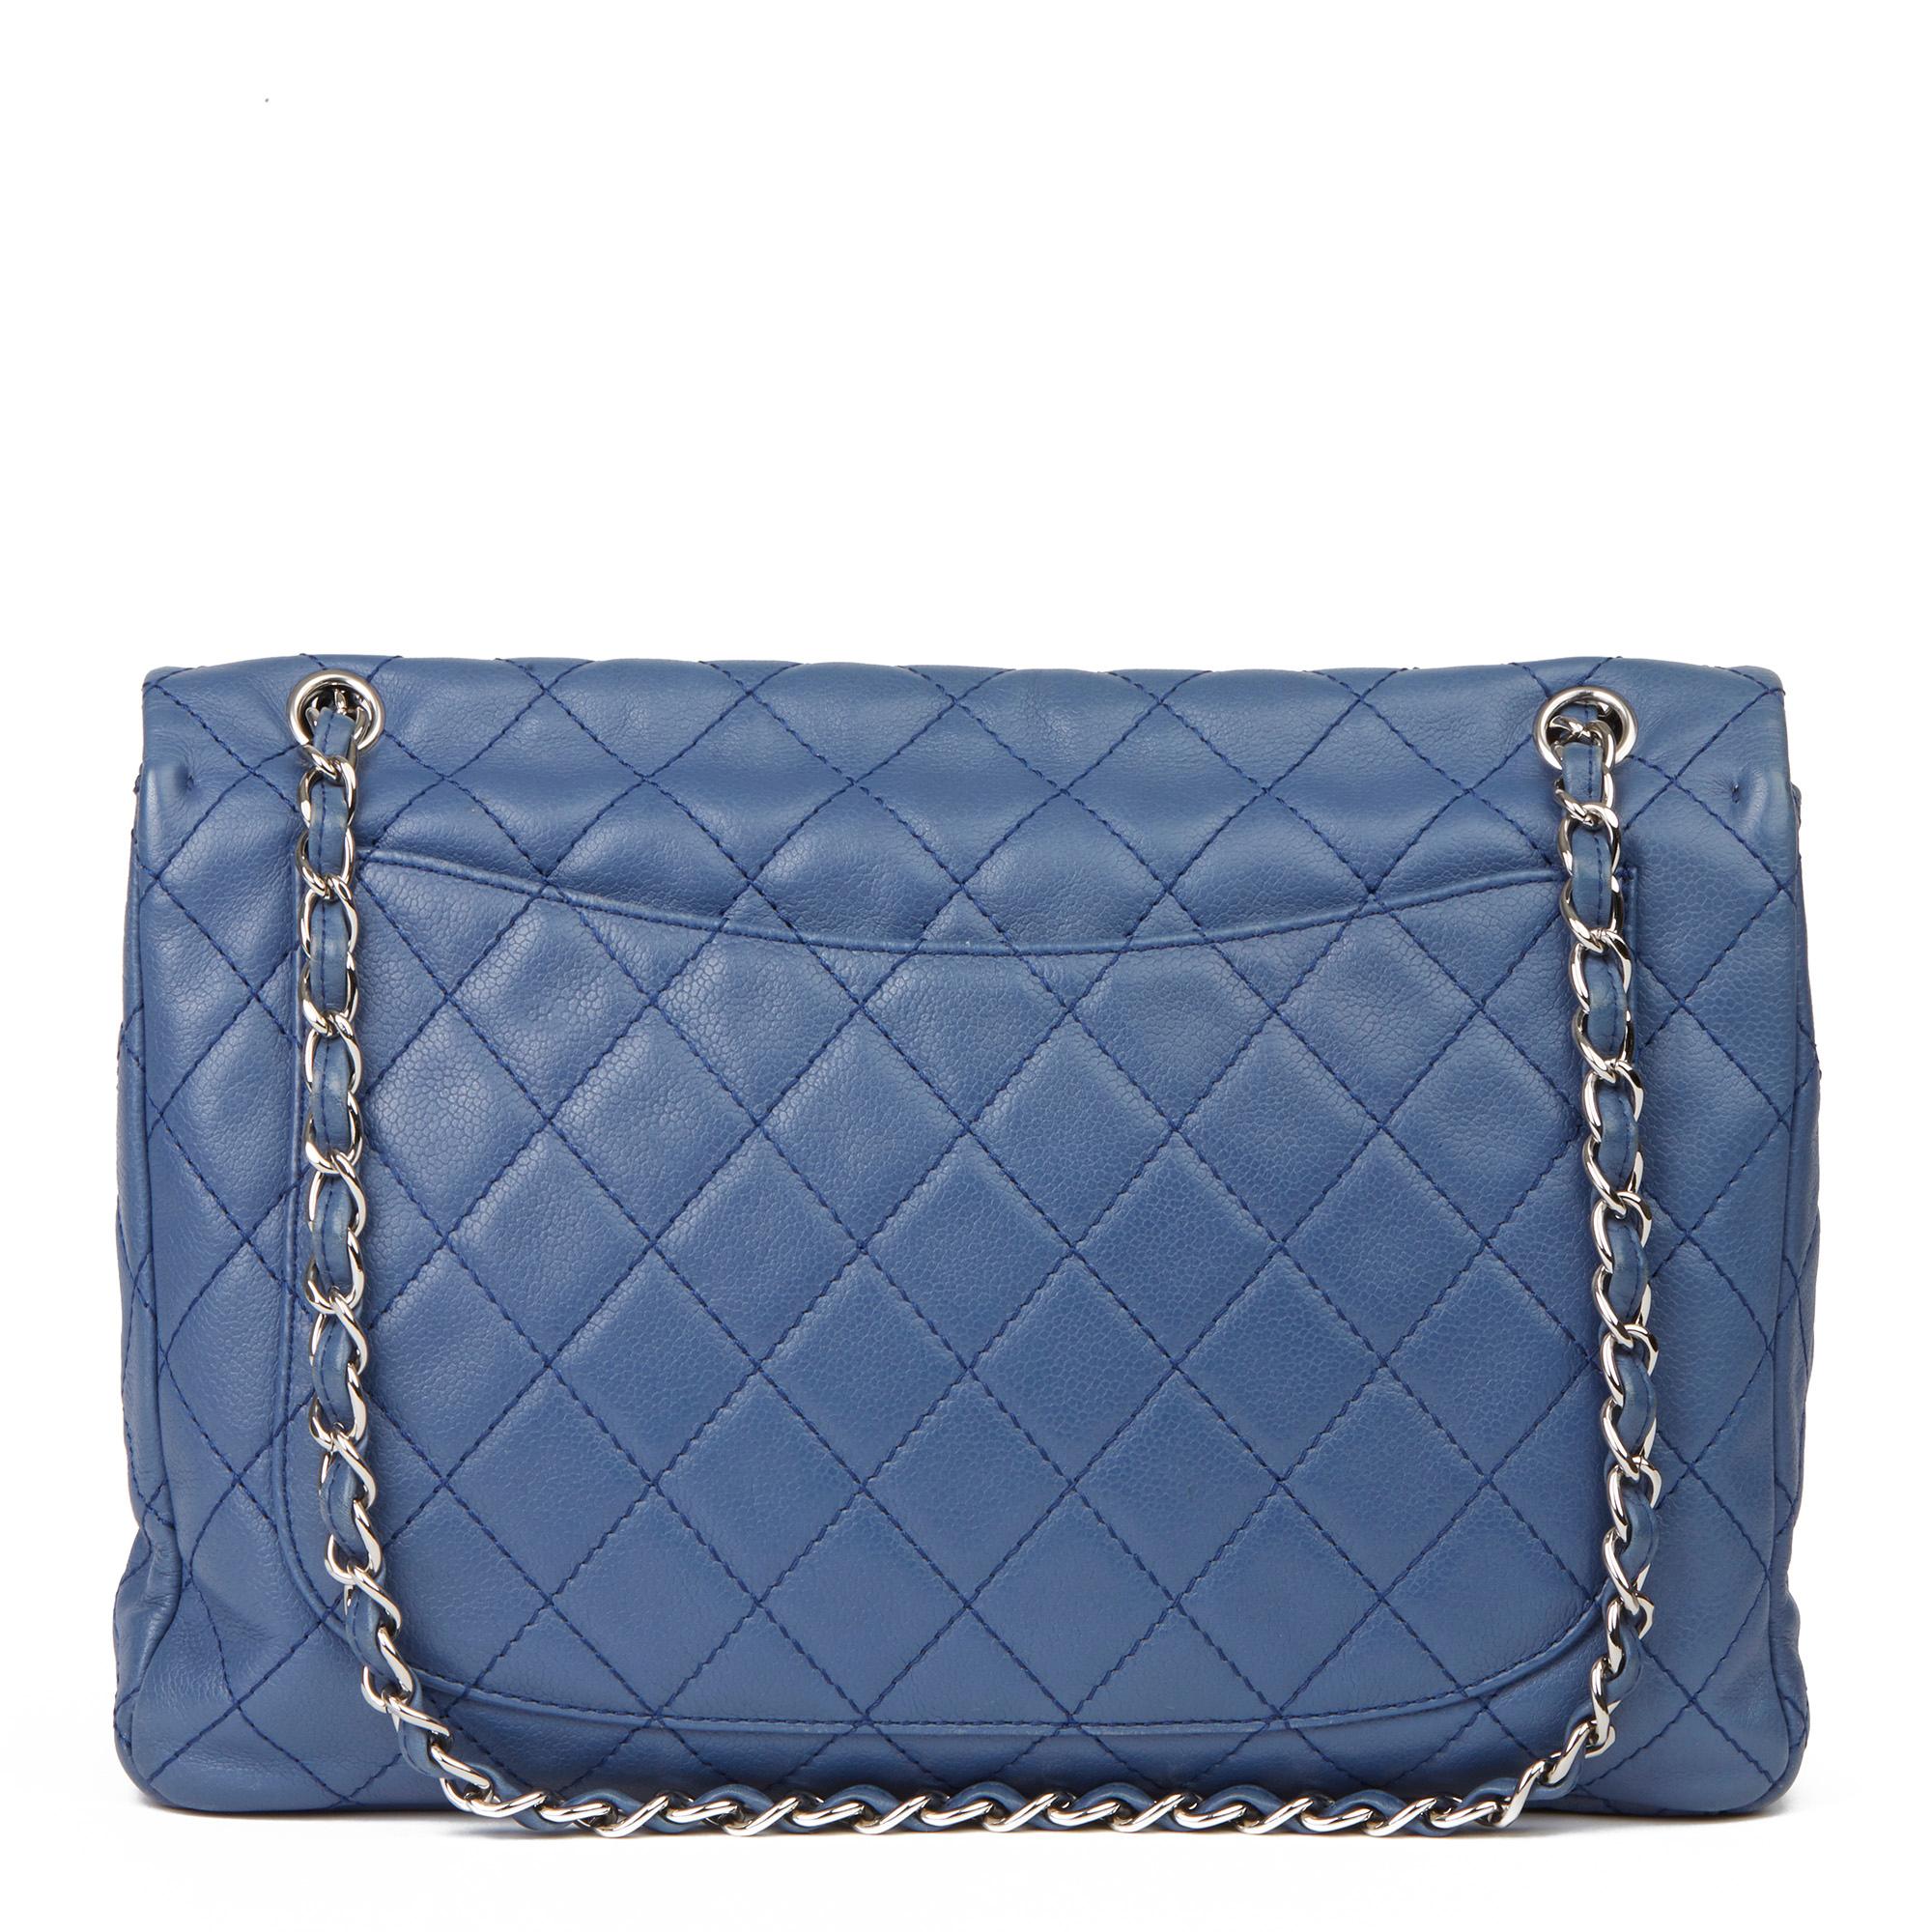 Women's 2008 Chanel Blue Quilted Caviar Leather Jumbo Classic Single Flap Bag